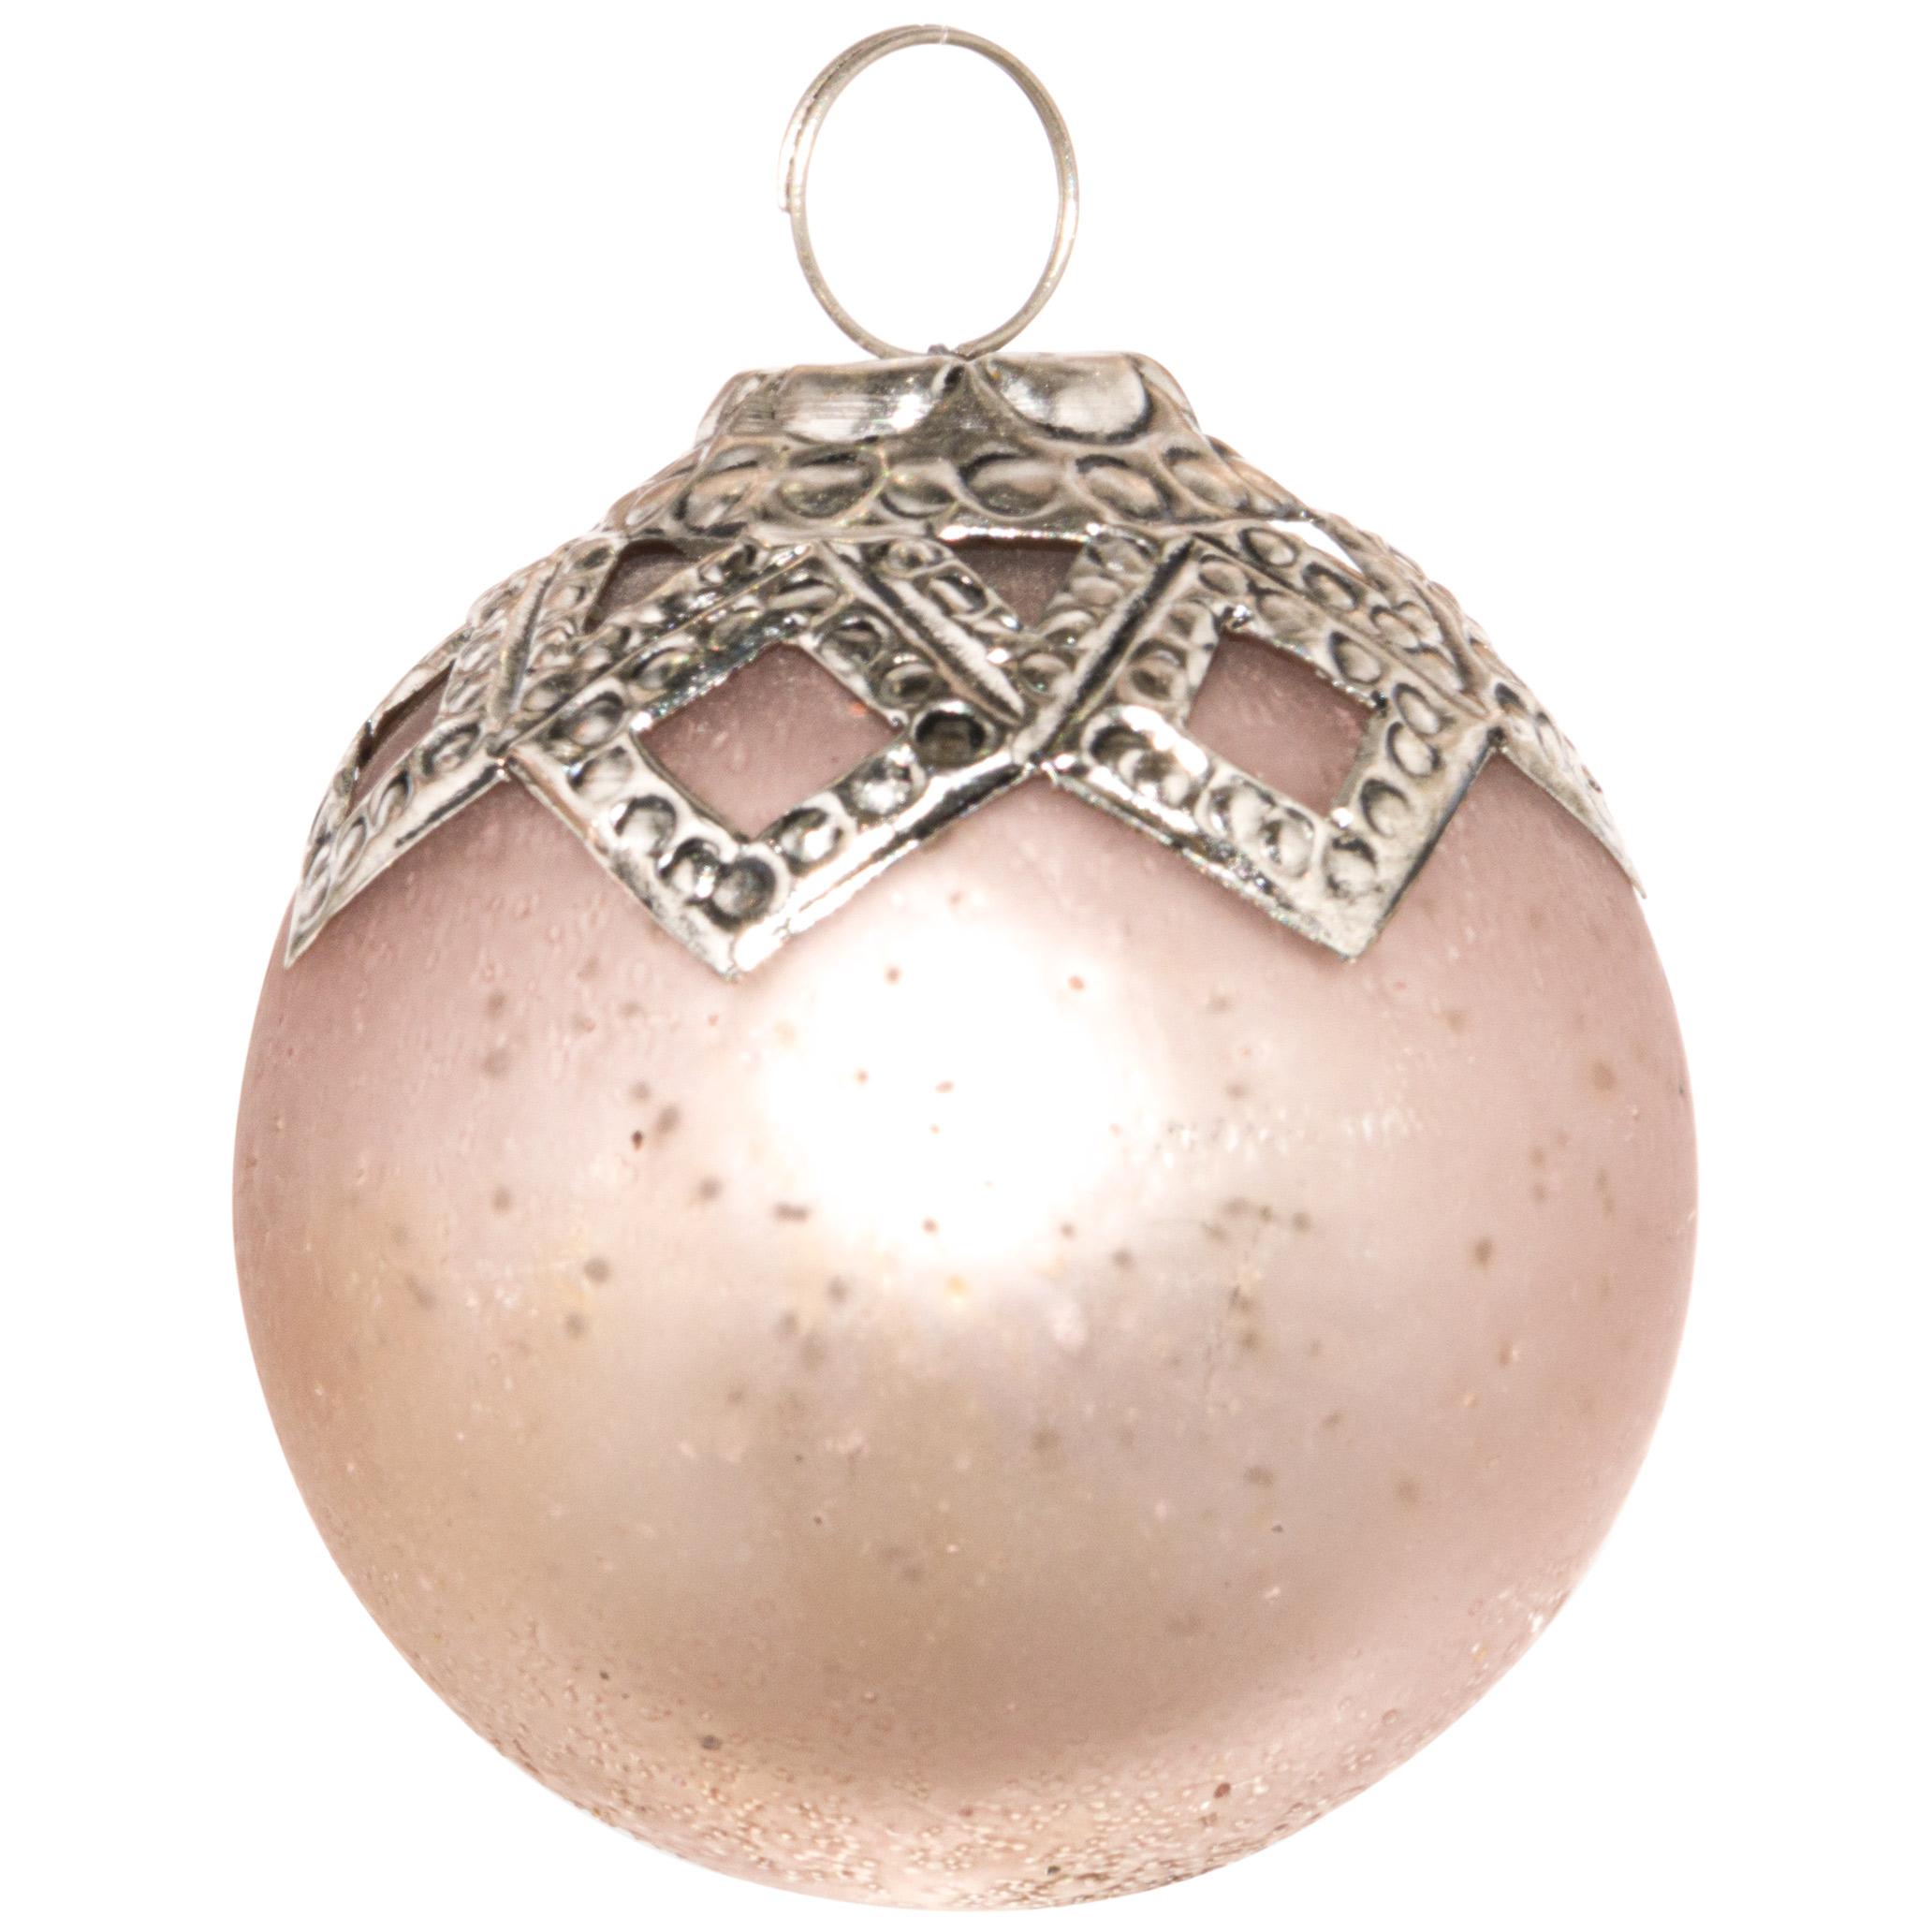 The Noel Collection Venus Diamond Crested Small Bauble - Image 1